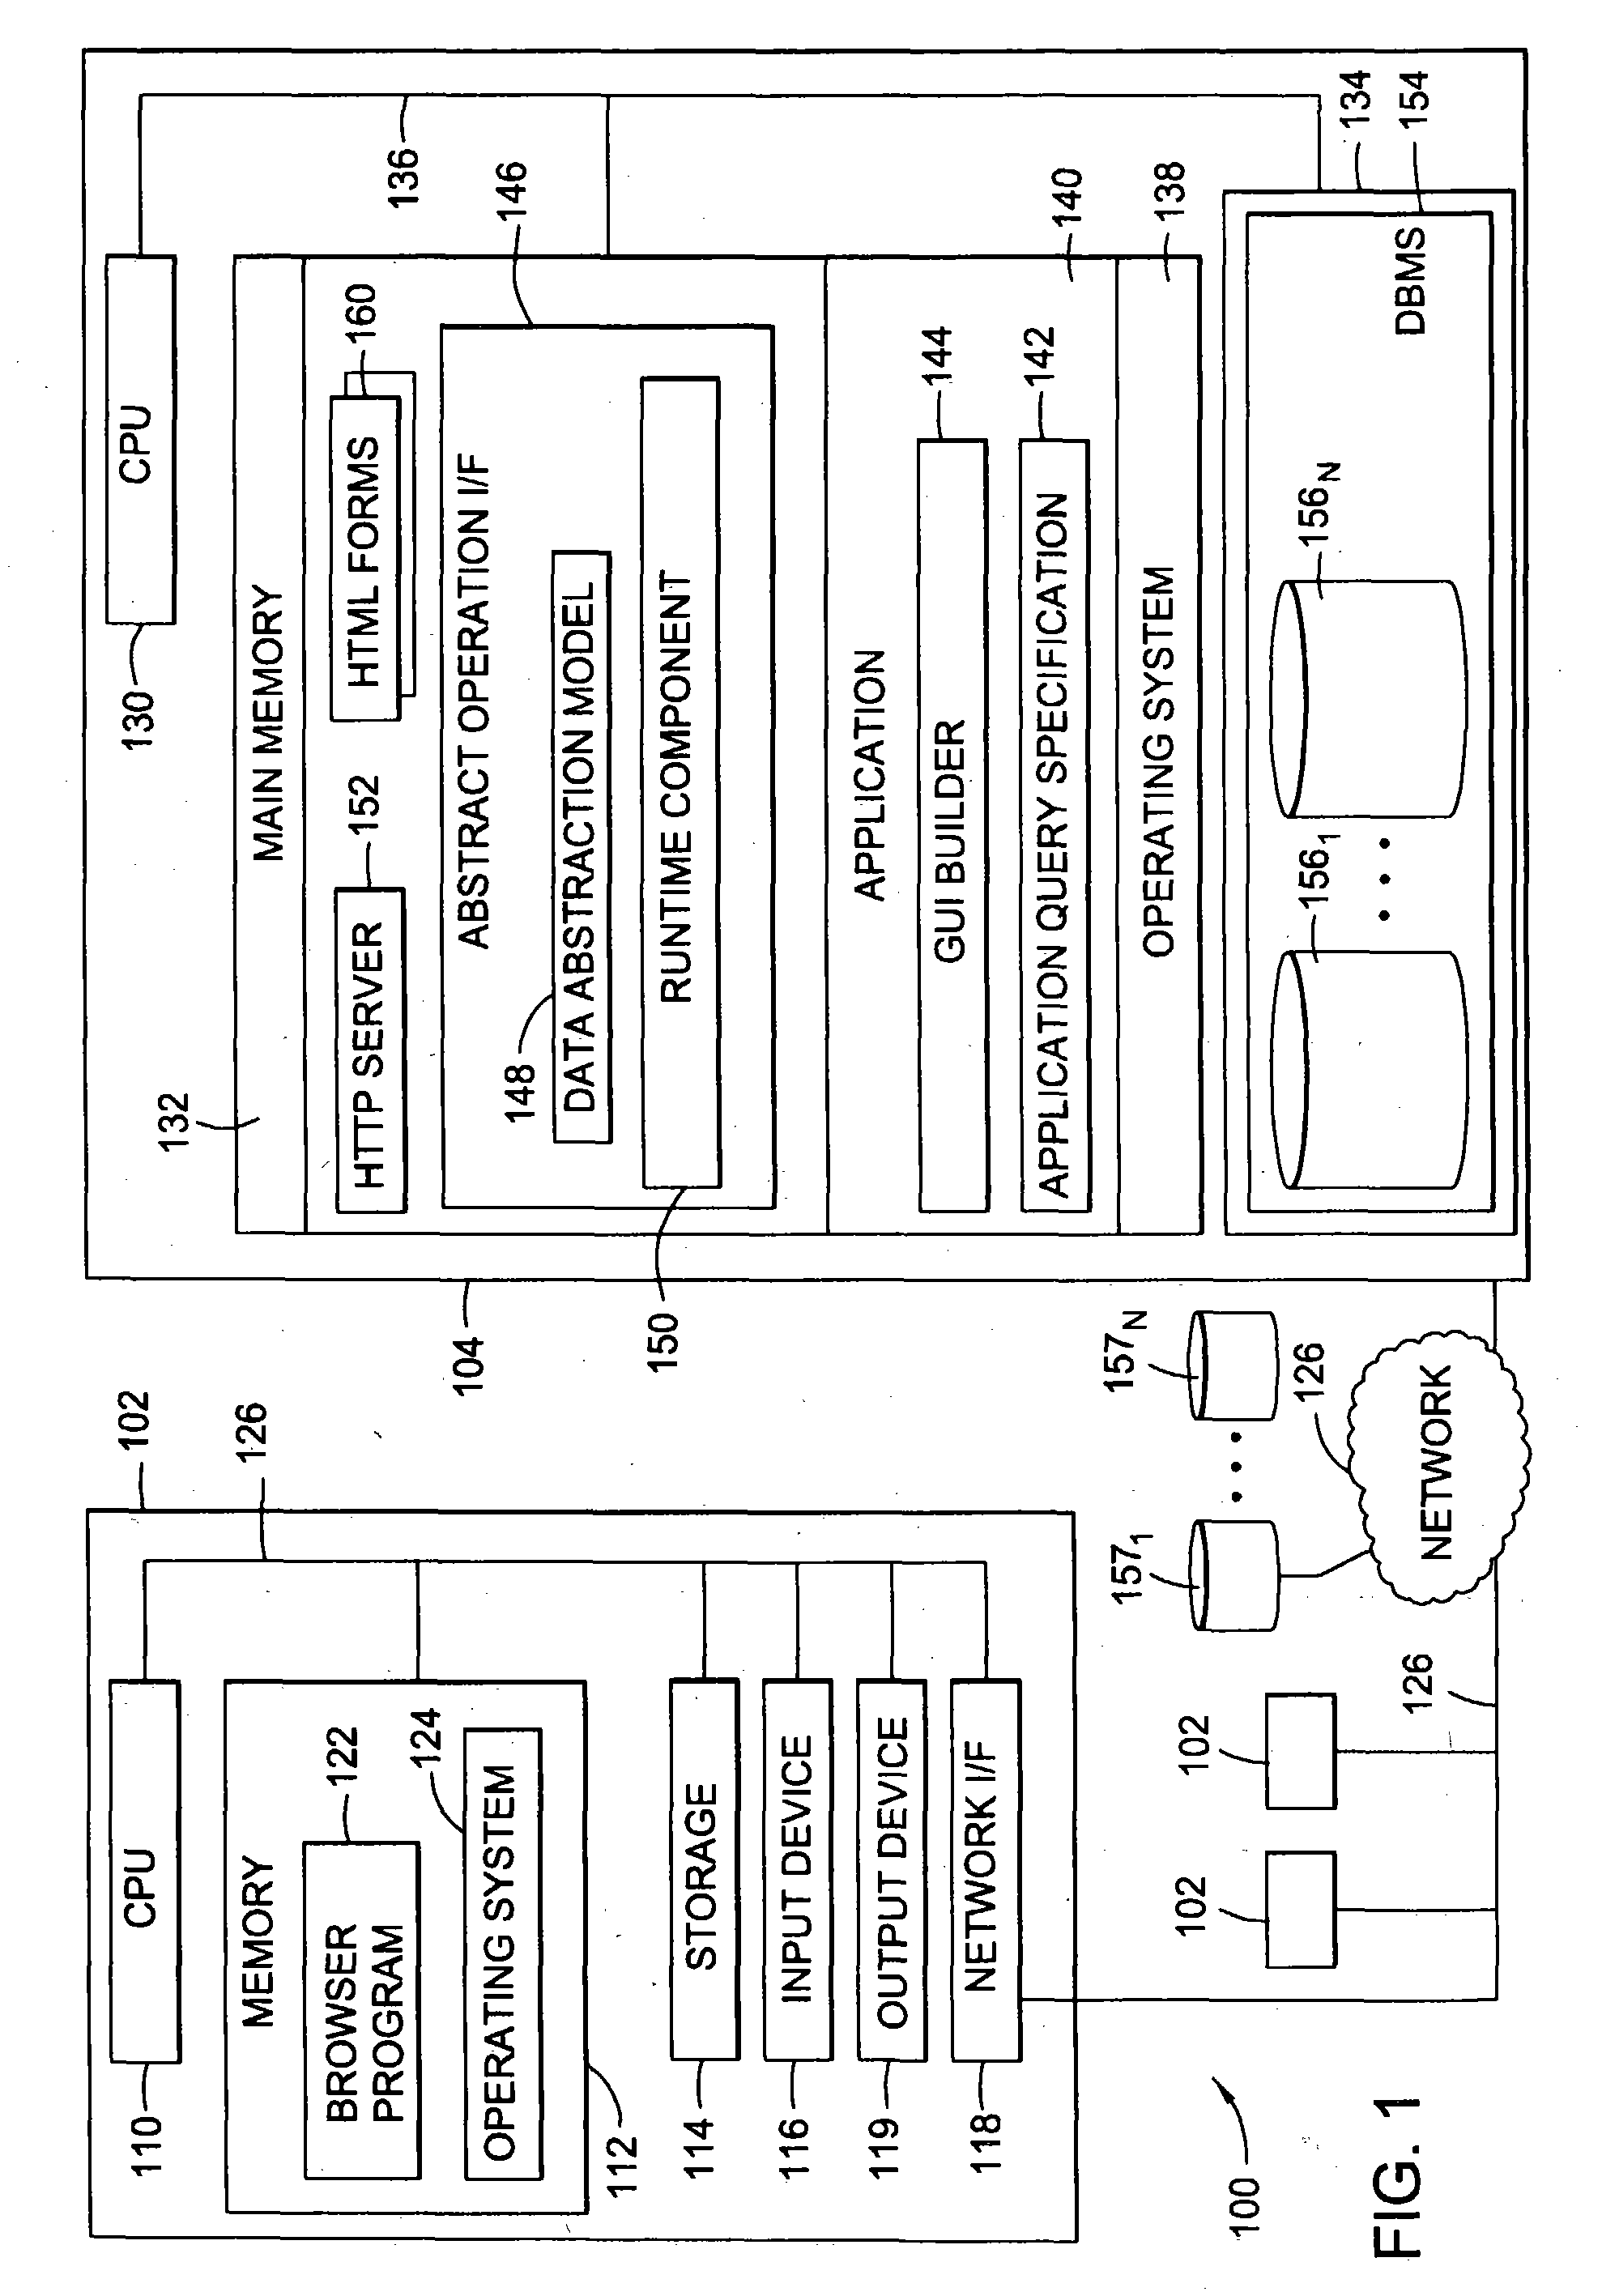 Abstract data linking and joining interface